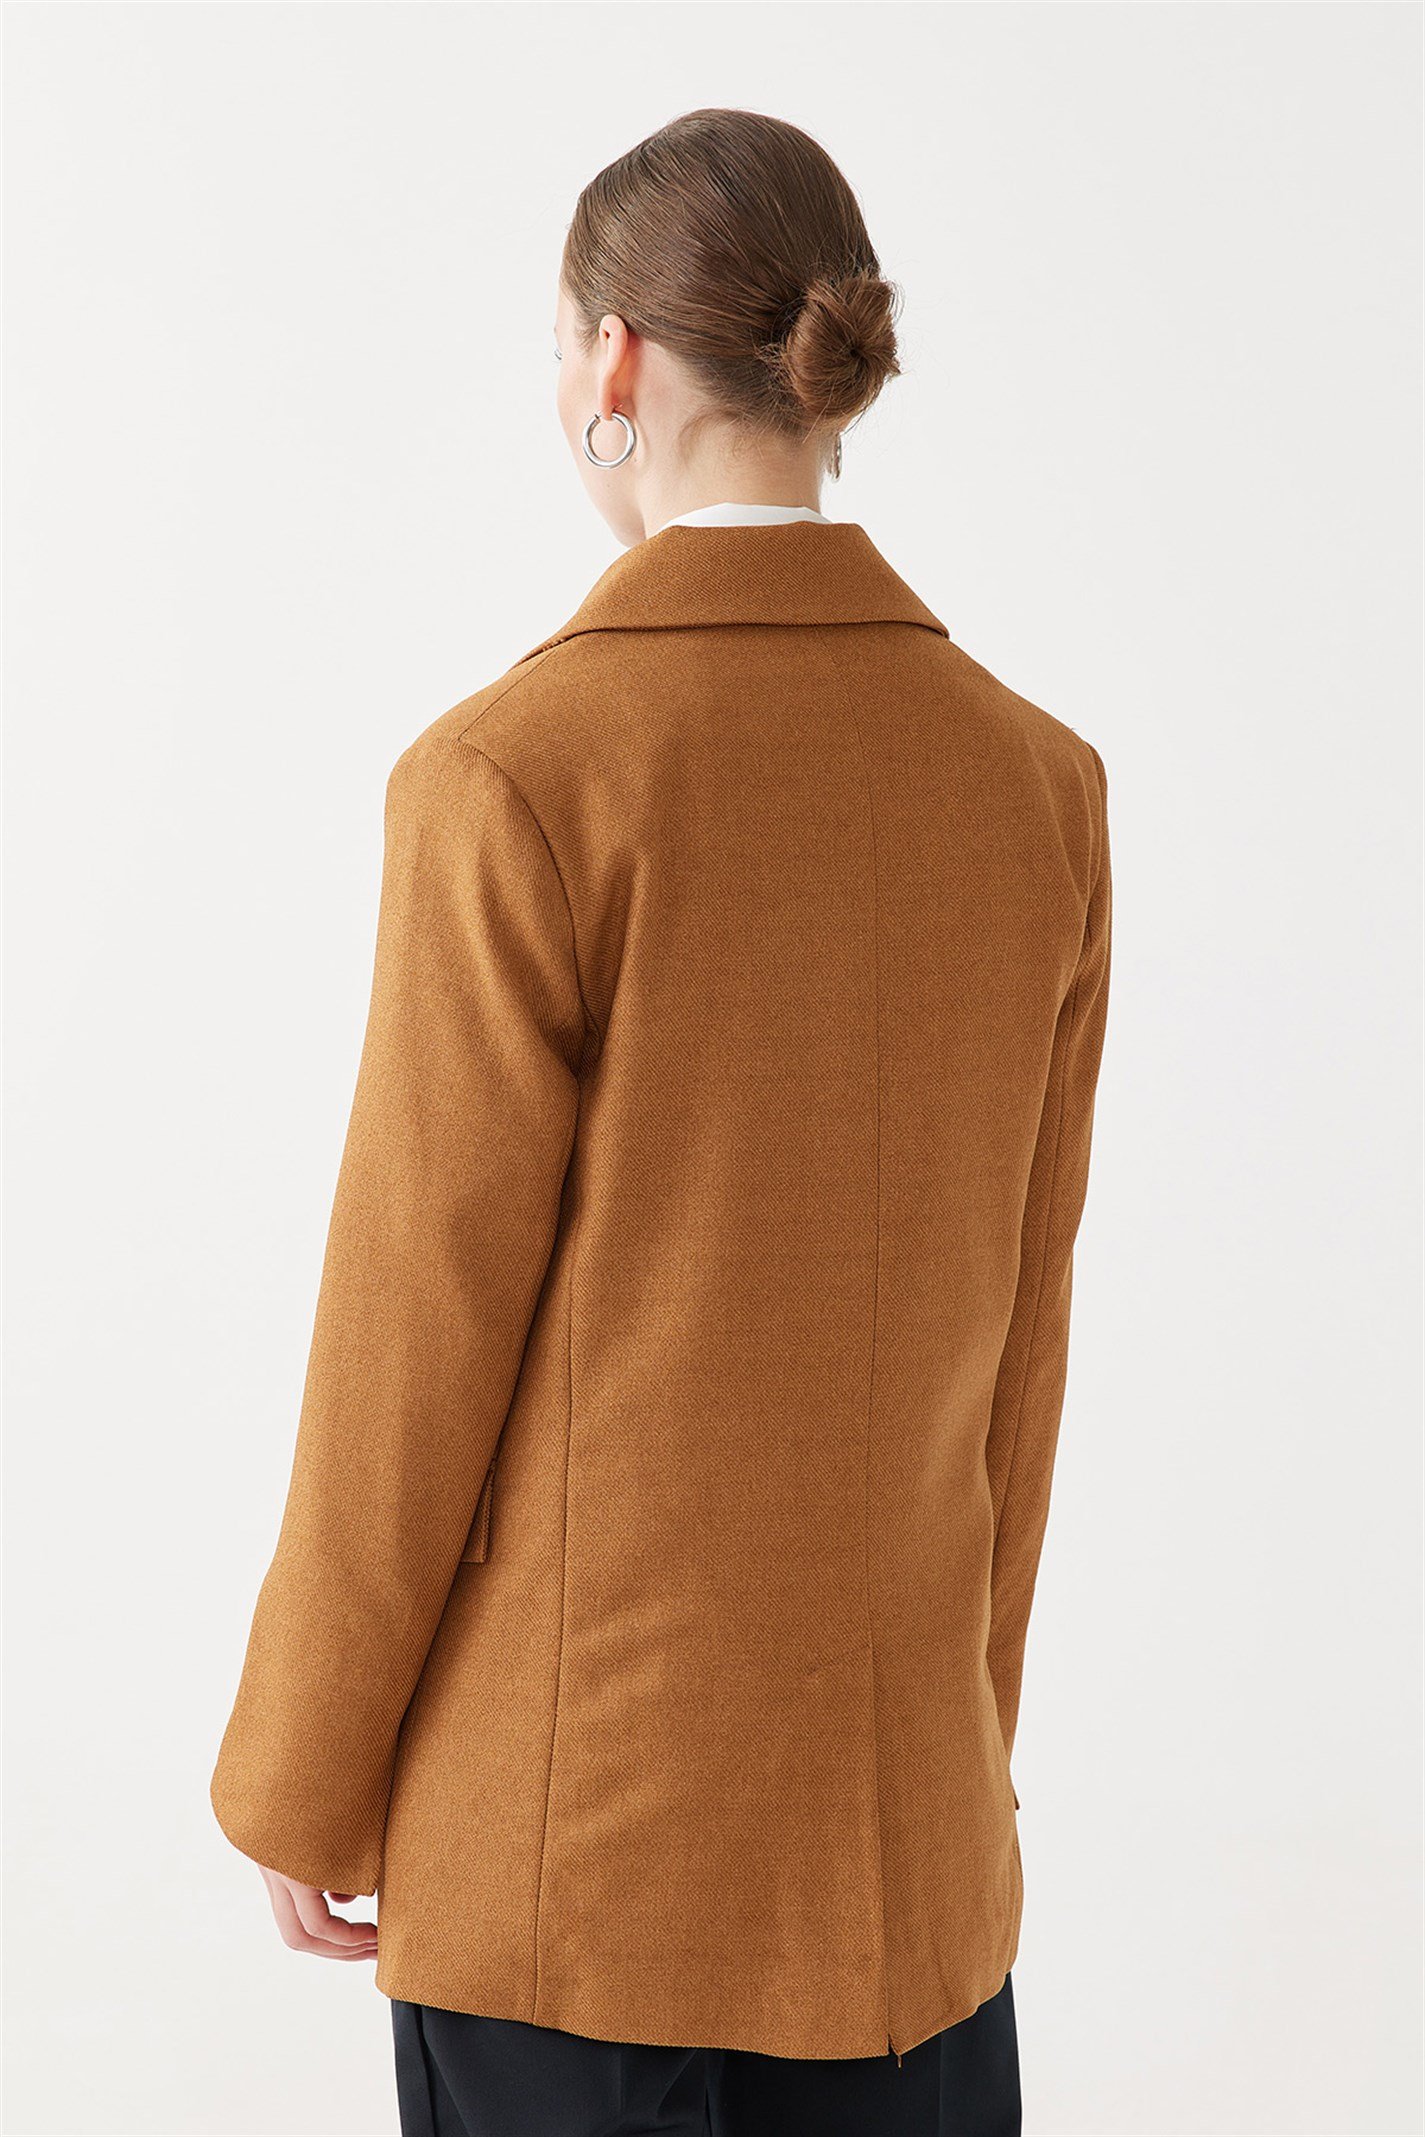 Camel Buttoned Textured Blazer Jacket | Suud Collection